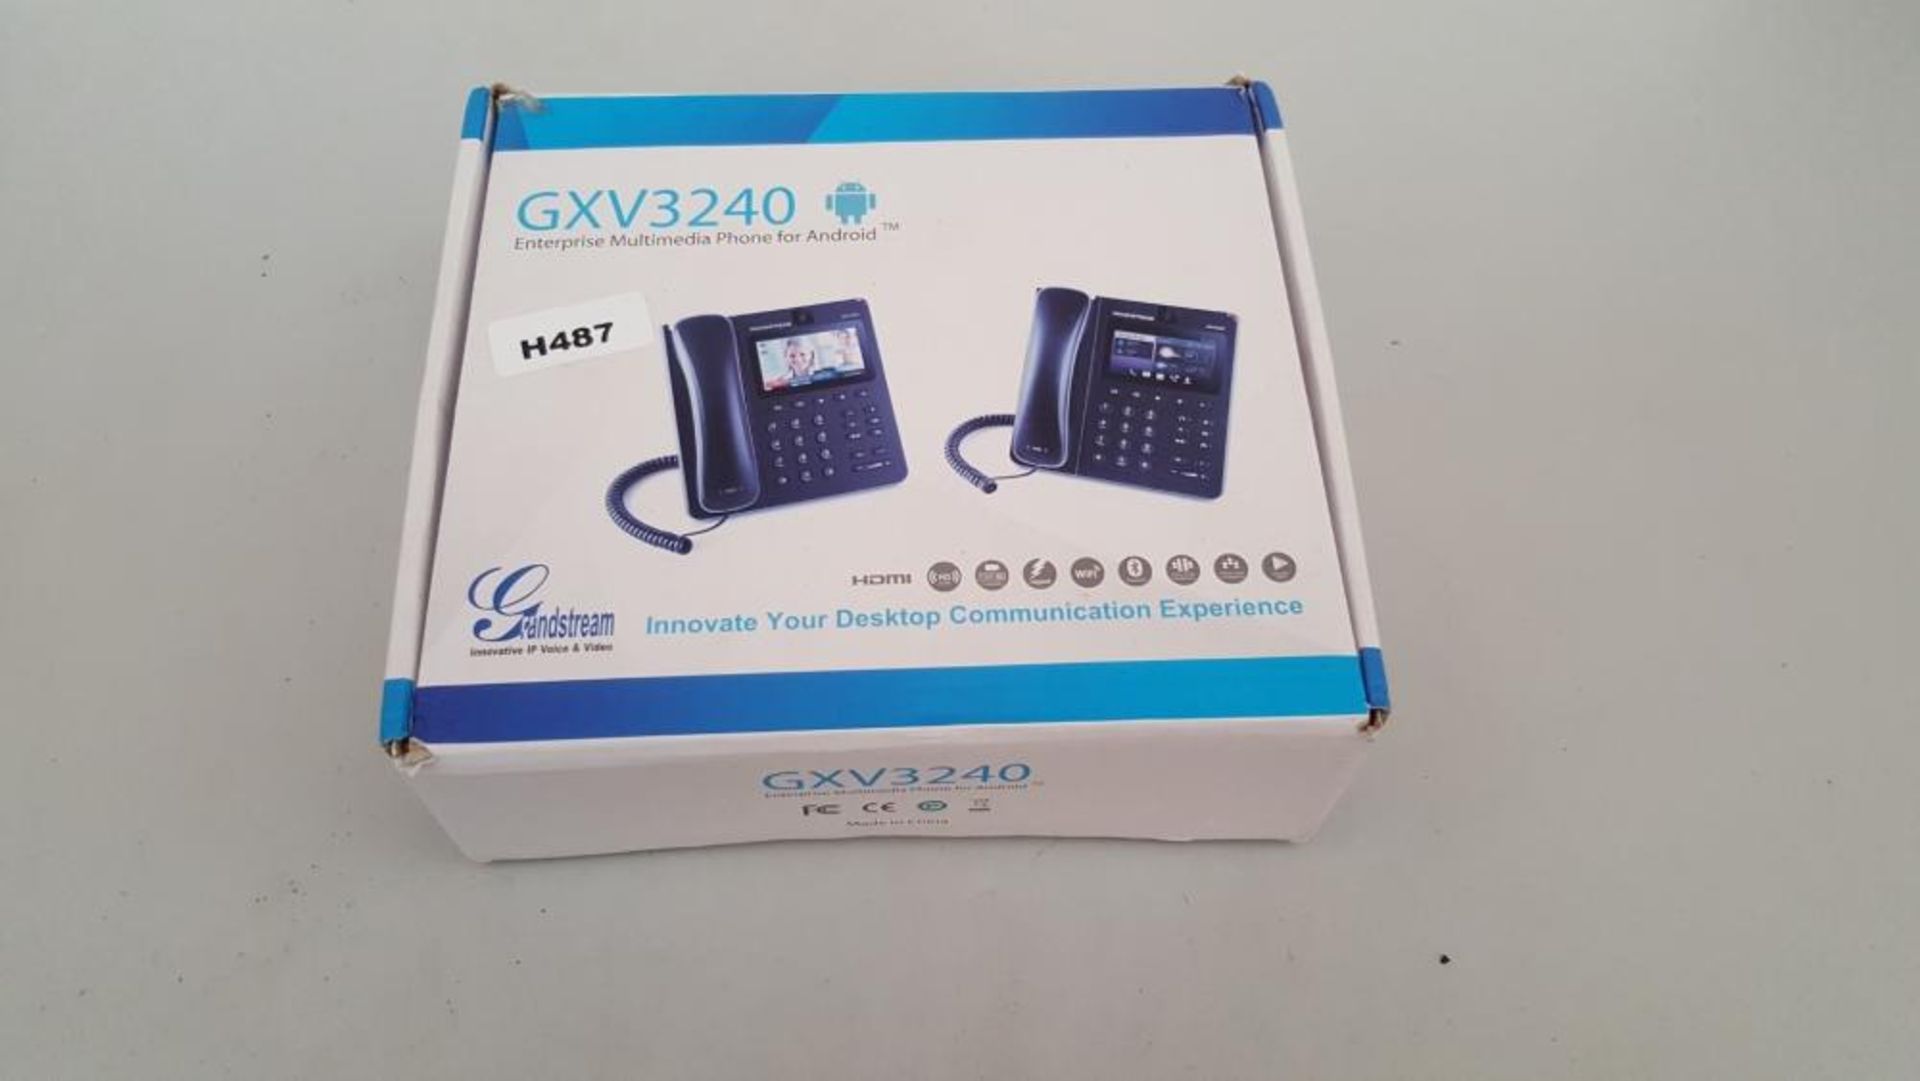 1 x Grandstream GXV3240 Multimedia IP Phone for Android - Ref H487 - CL011 - Location: Altrincham WA